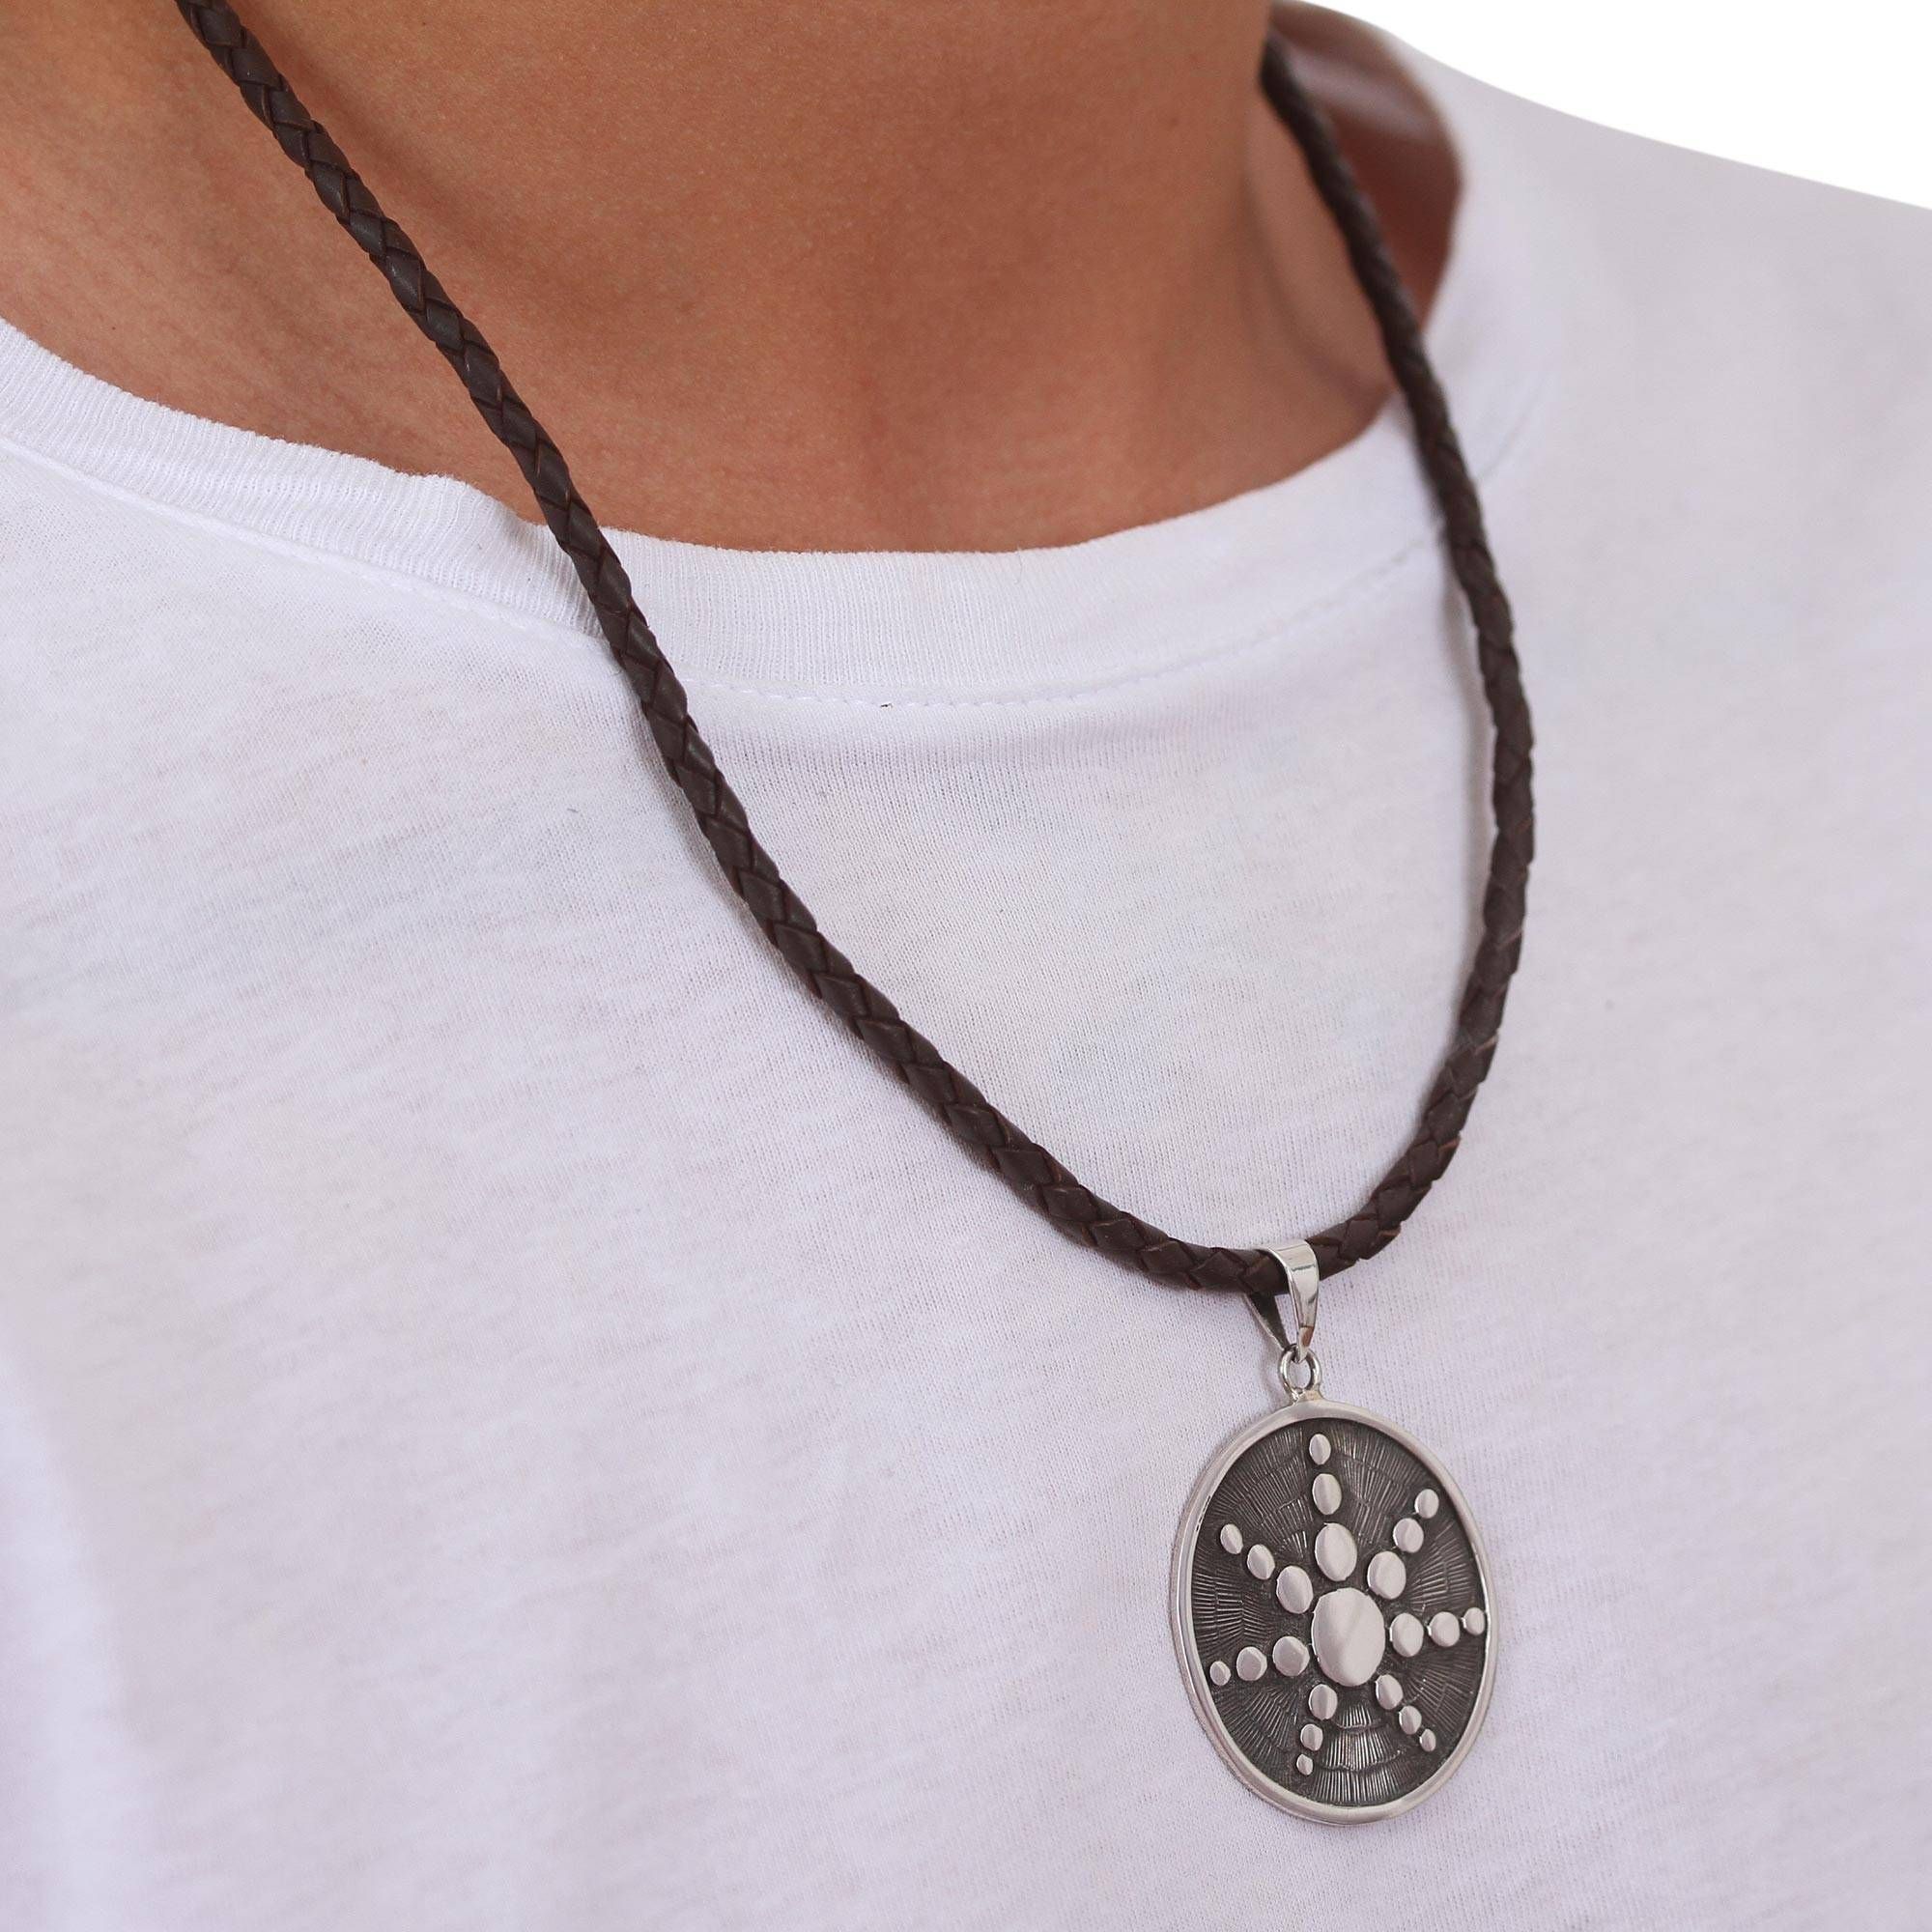 Taxco Silver And Brown Leather Artisan Crafted Necklace, 'star In The Moon' Intended For Latest Polished Moon &amp; Star Pendant Necklaces (View 15 of 25)